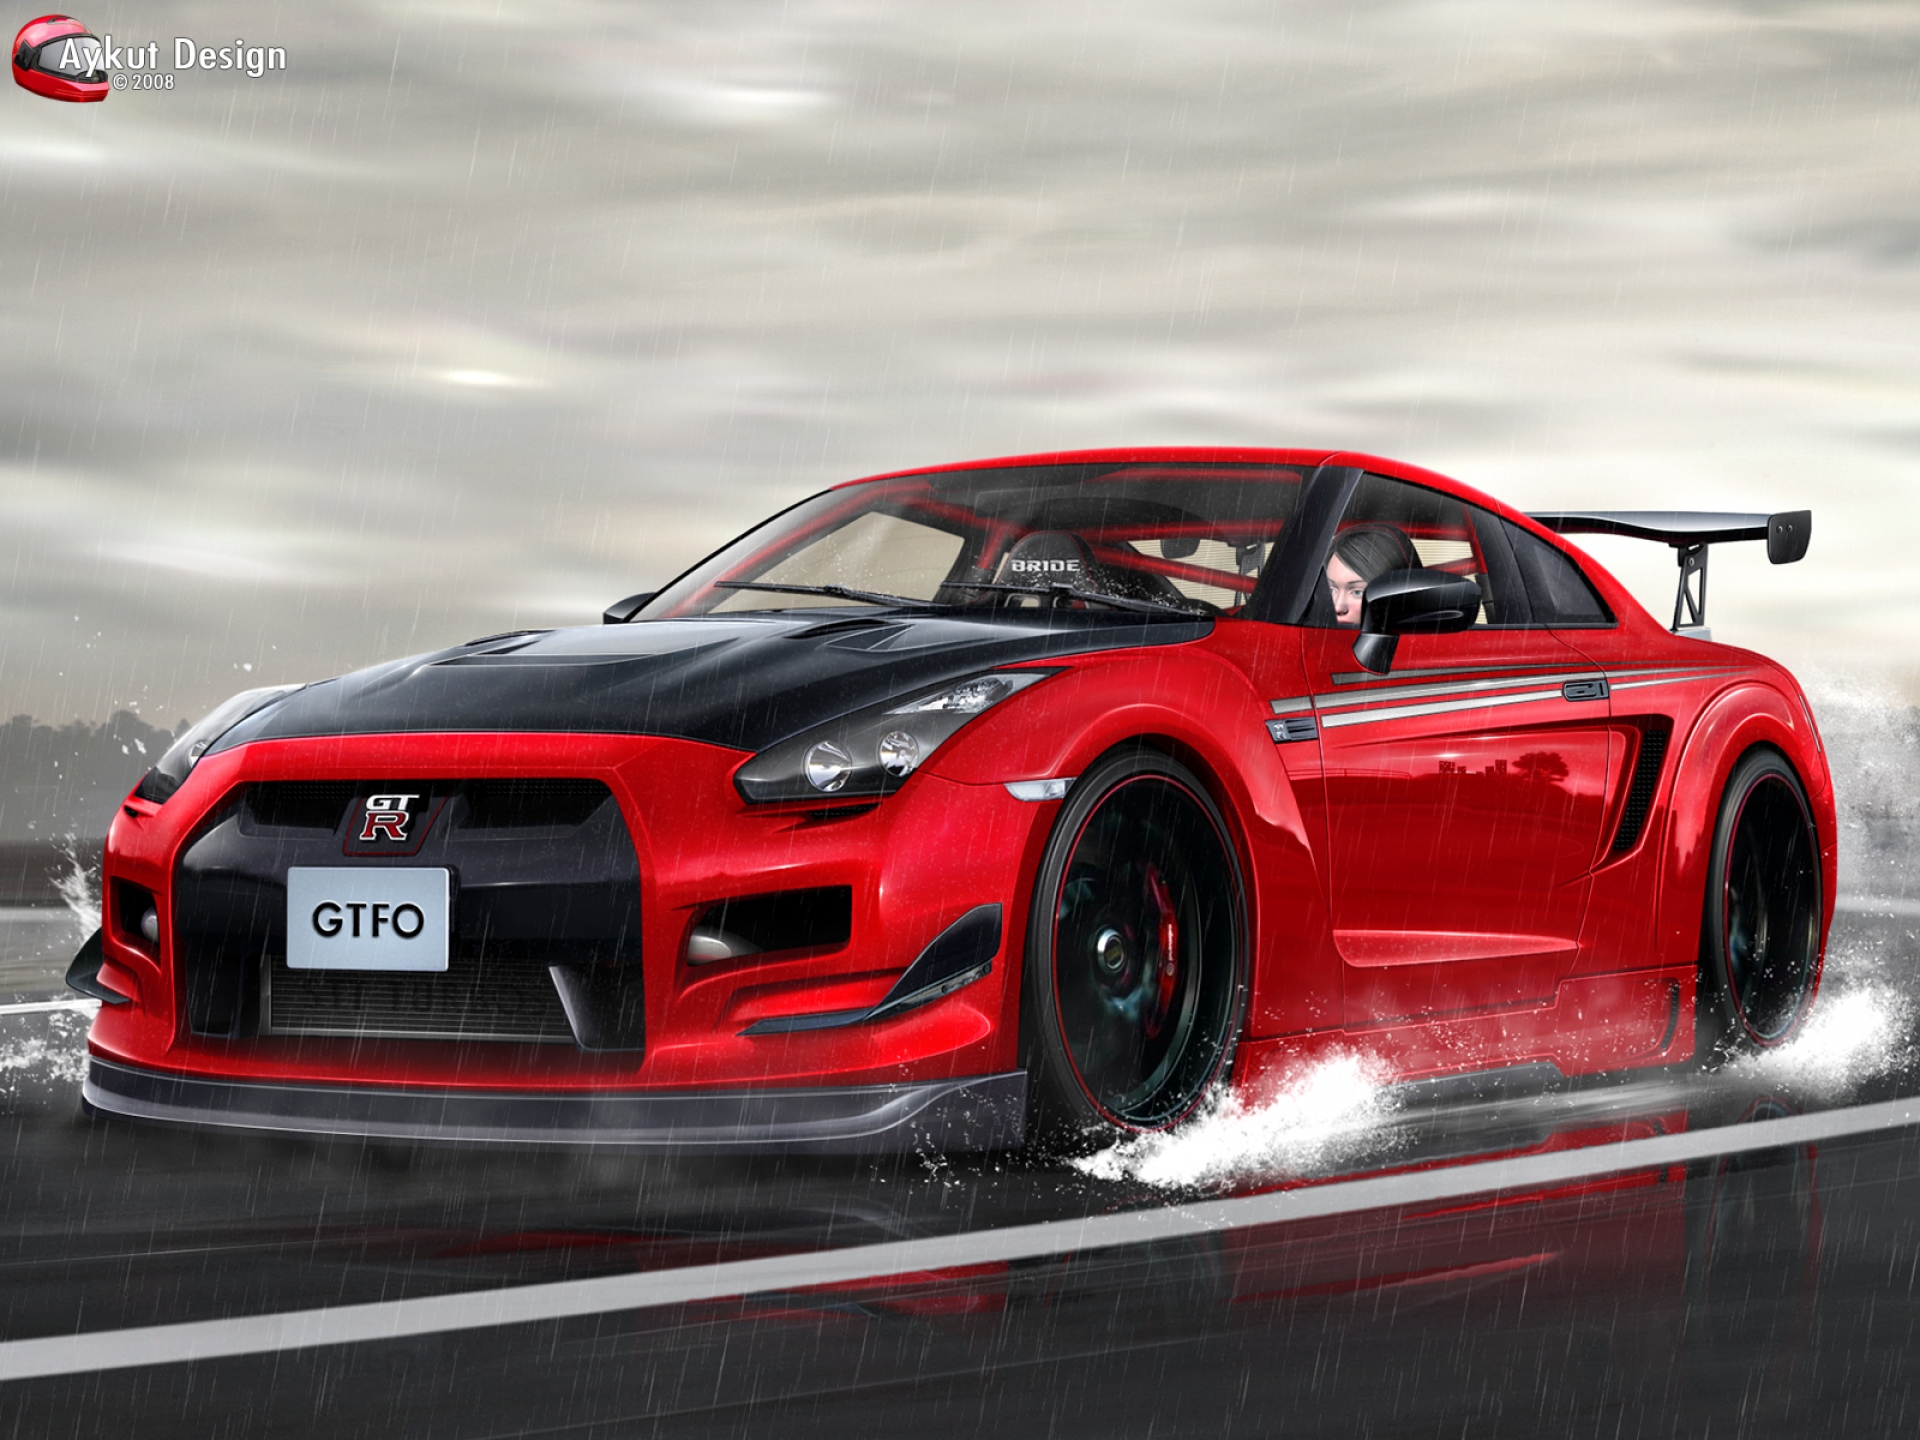 Nissan Gt-R Wallpapers